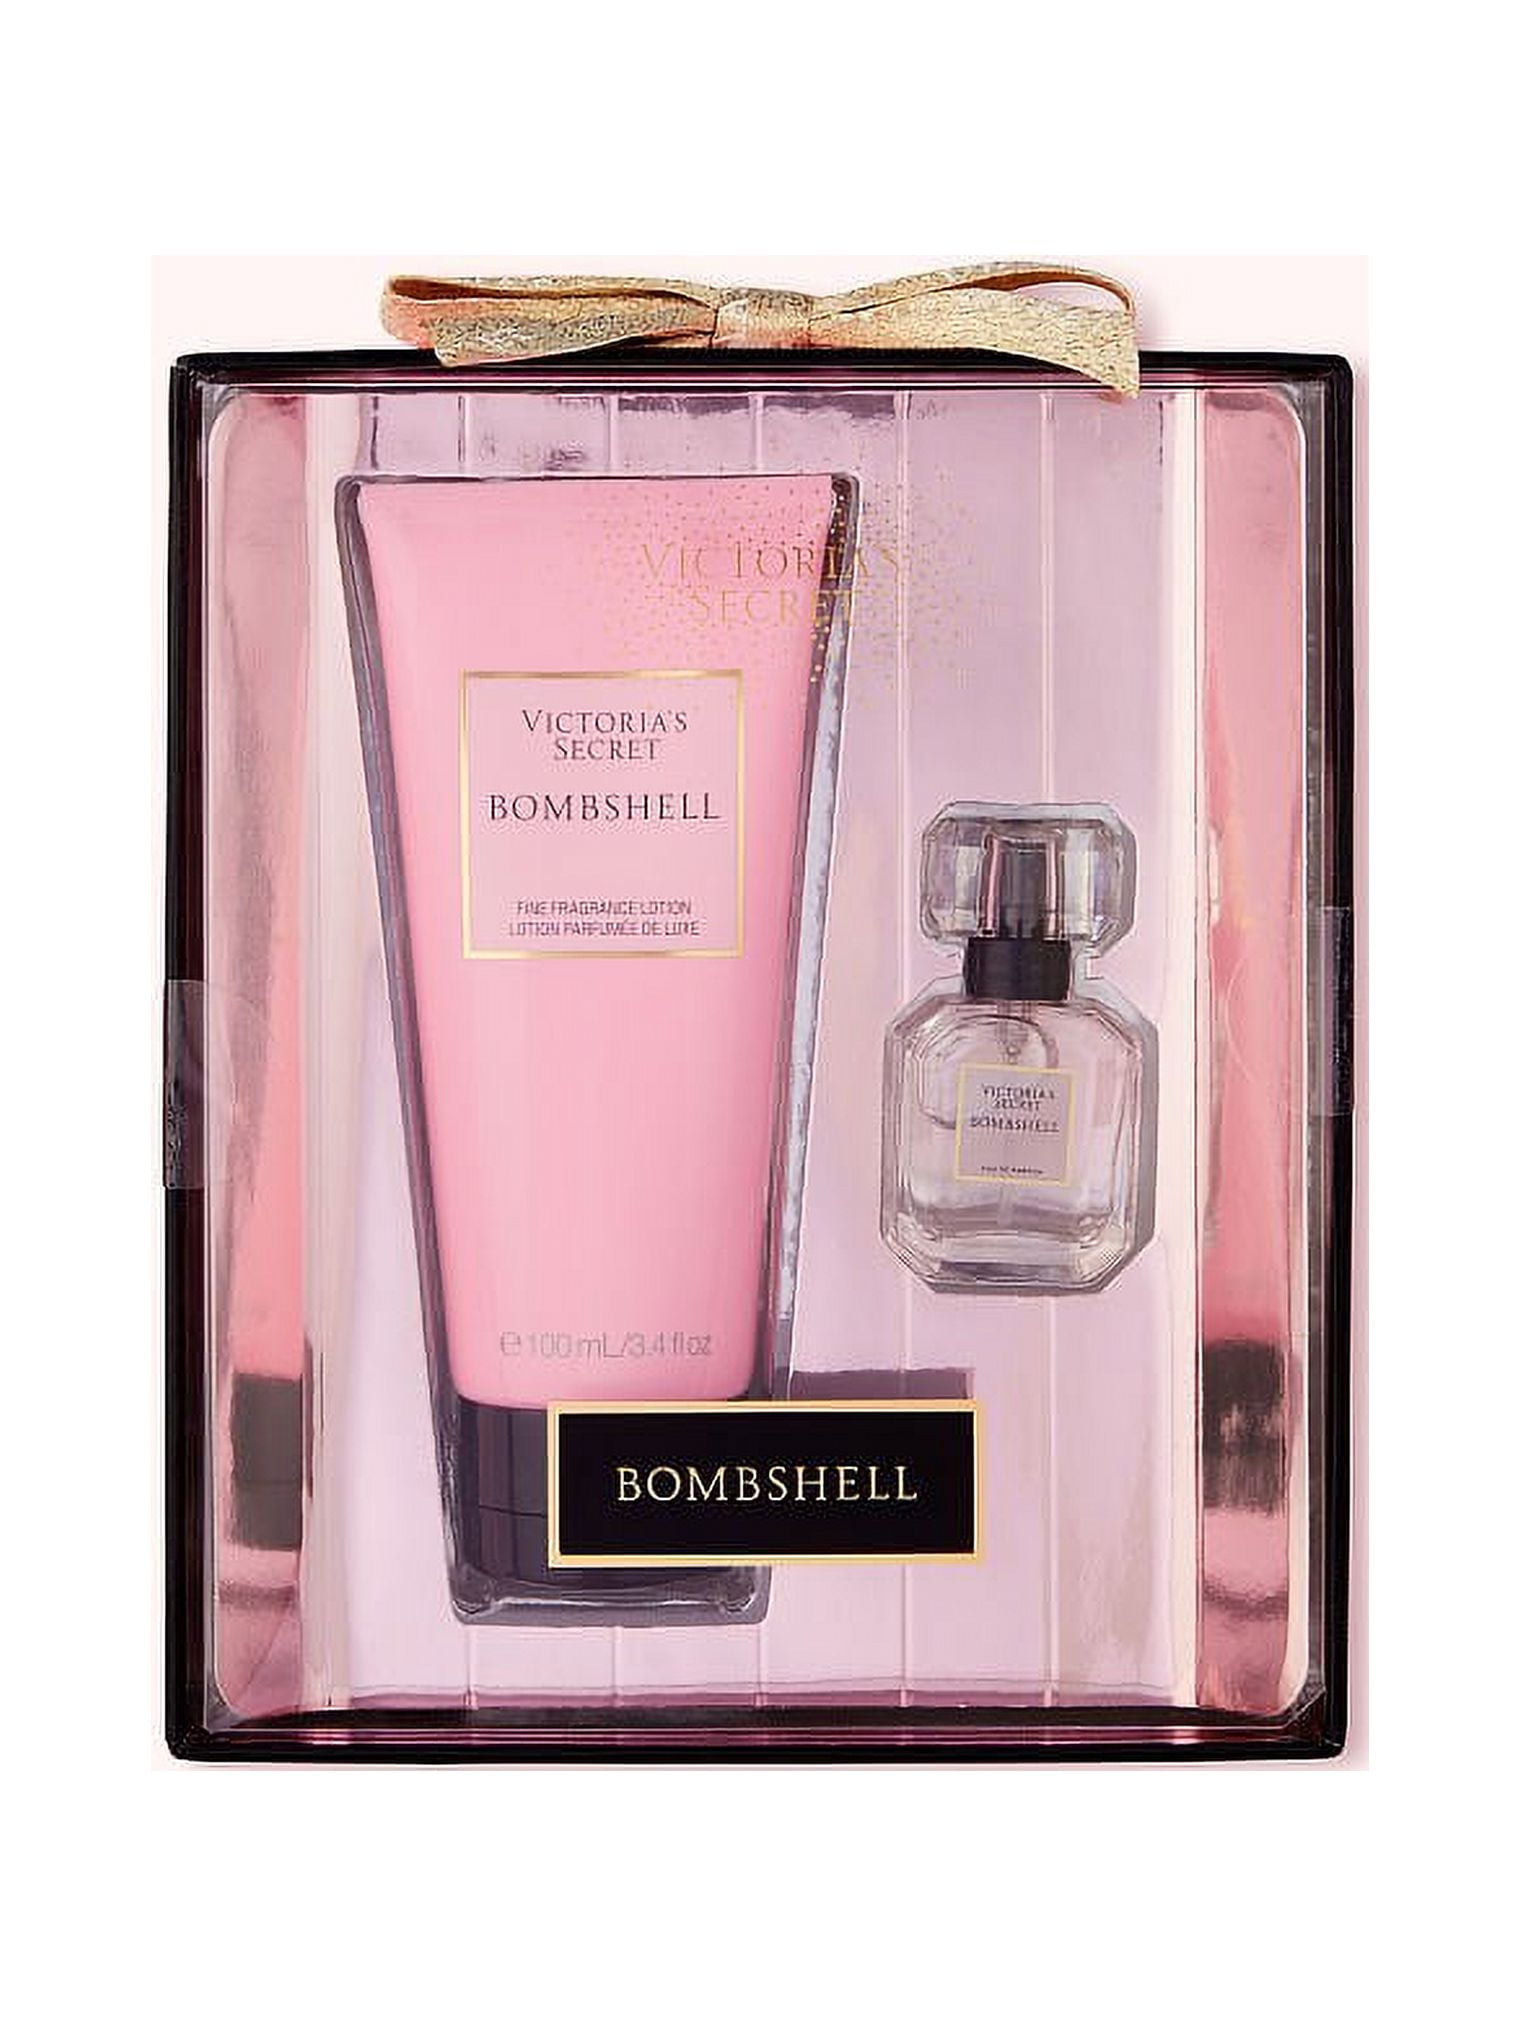 Buy Victoria's Secret 2 Piece Body Mist and Lotion Gift Set from